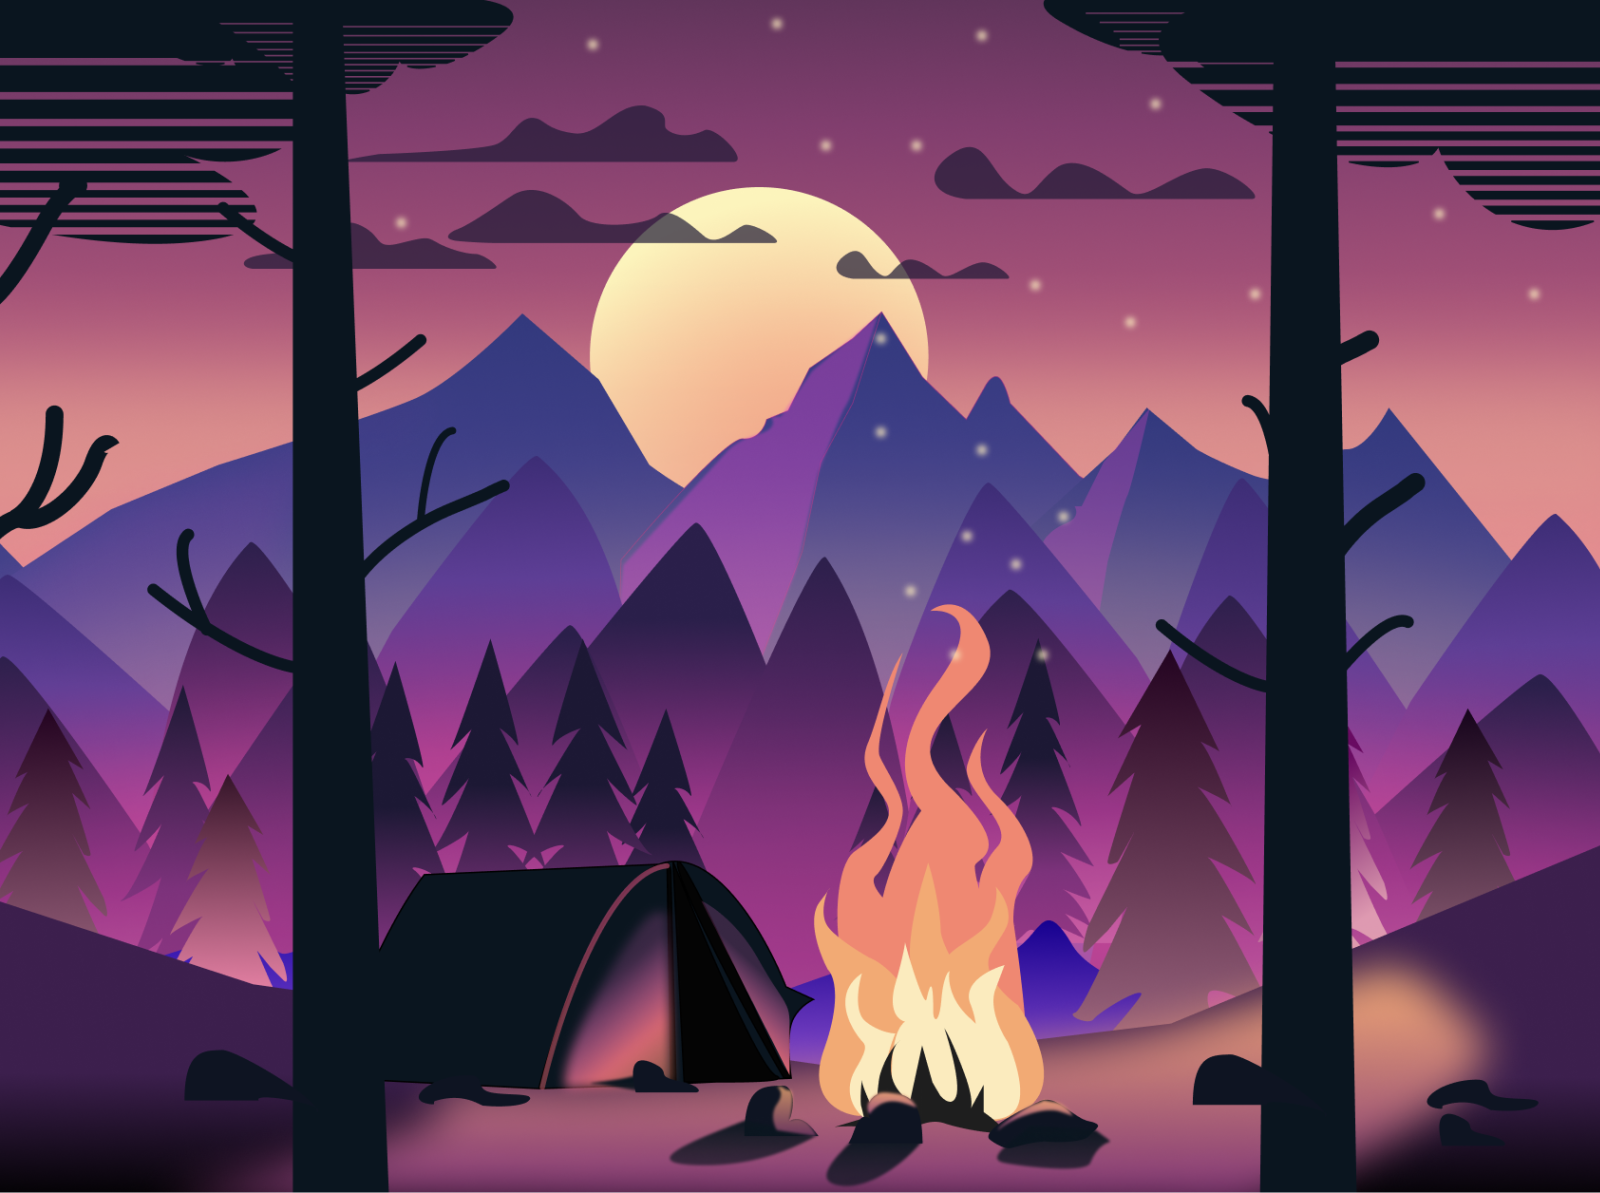 Illustration | Campfire | made in Figma by sahil wadhwa on Dribbble